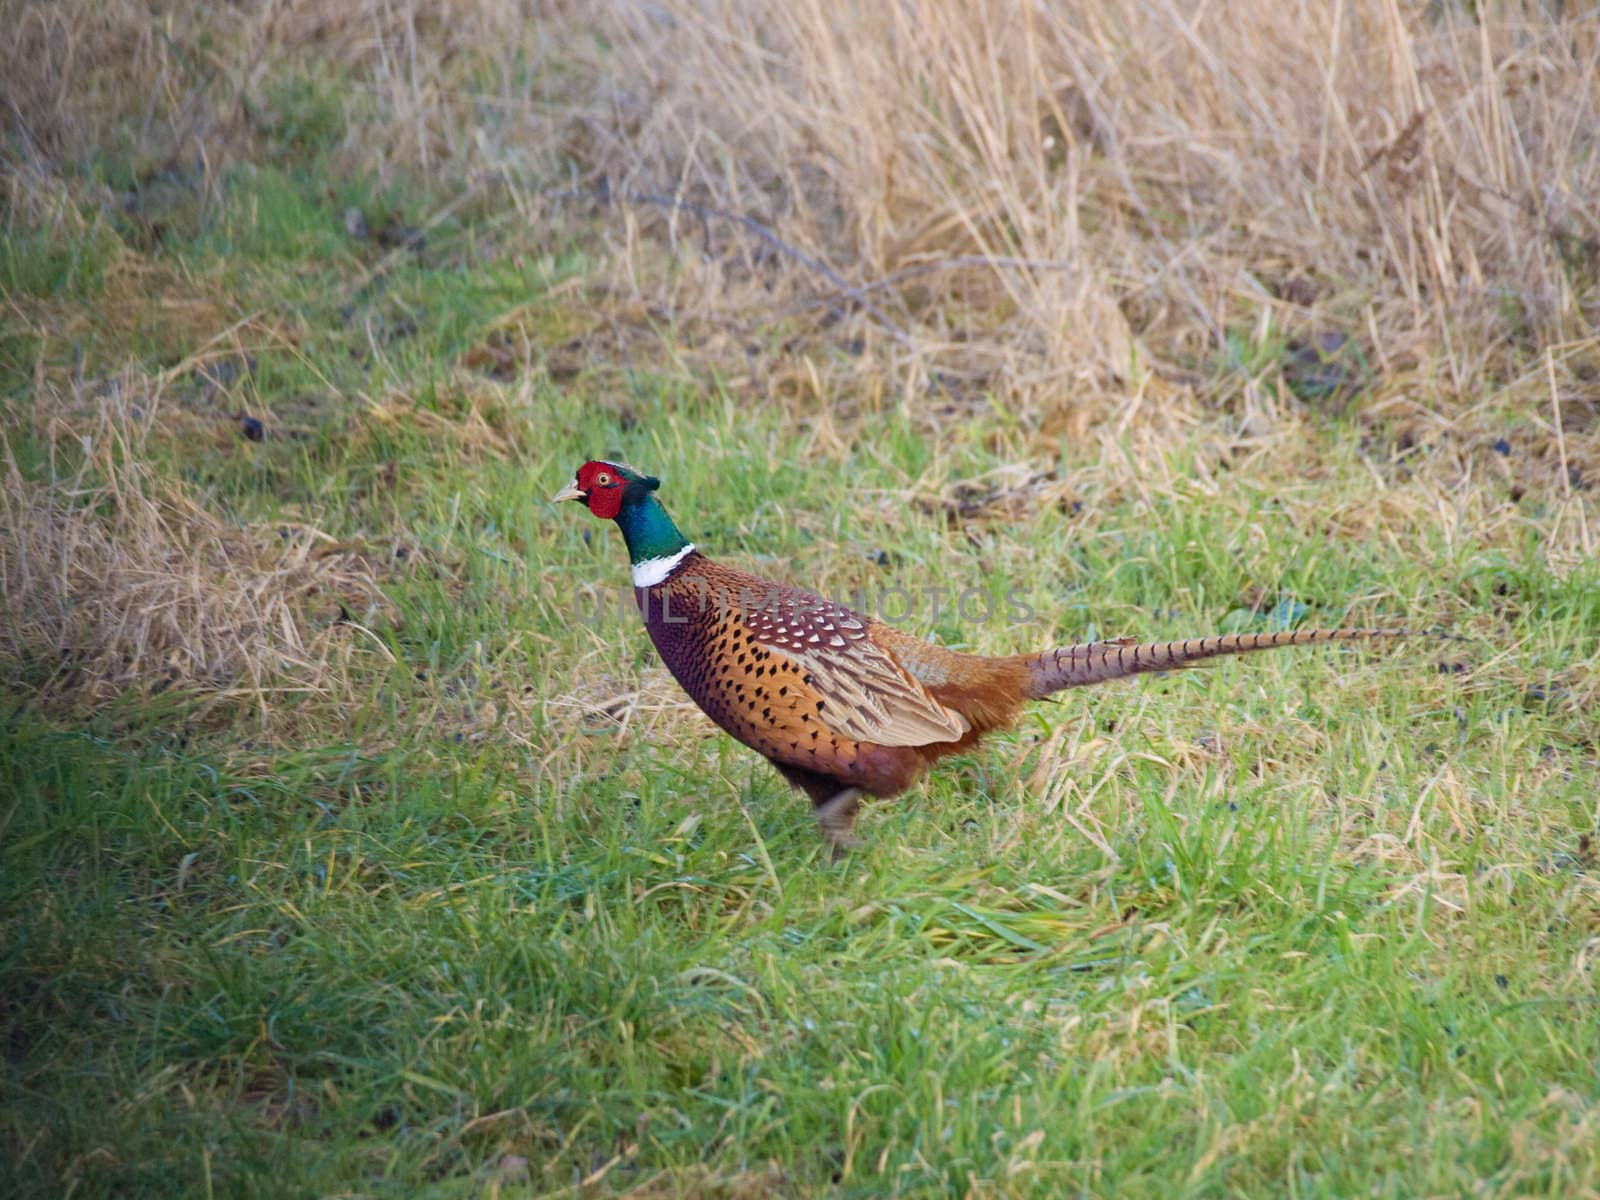 male pheasant in a field of grass by timbphotography